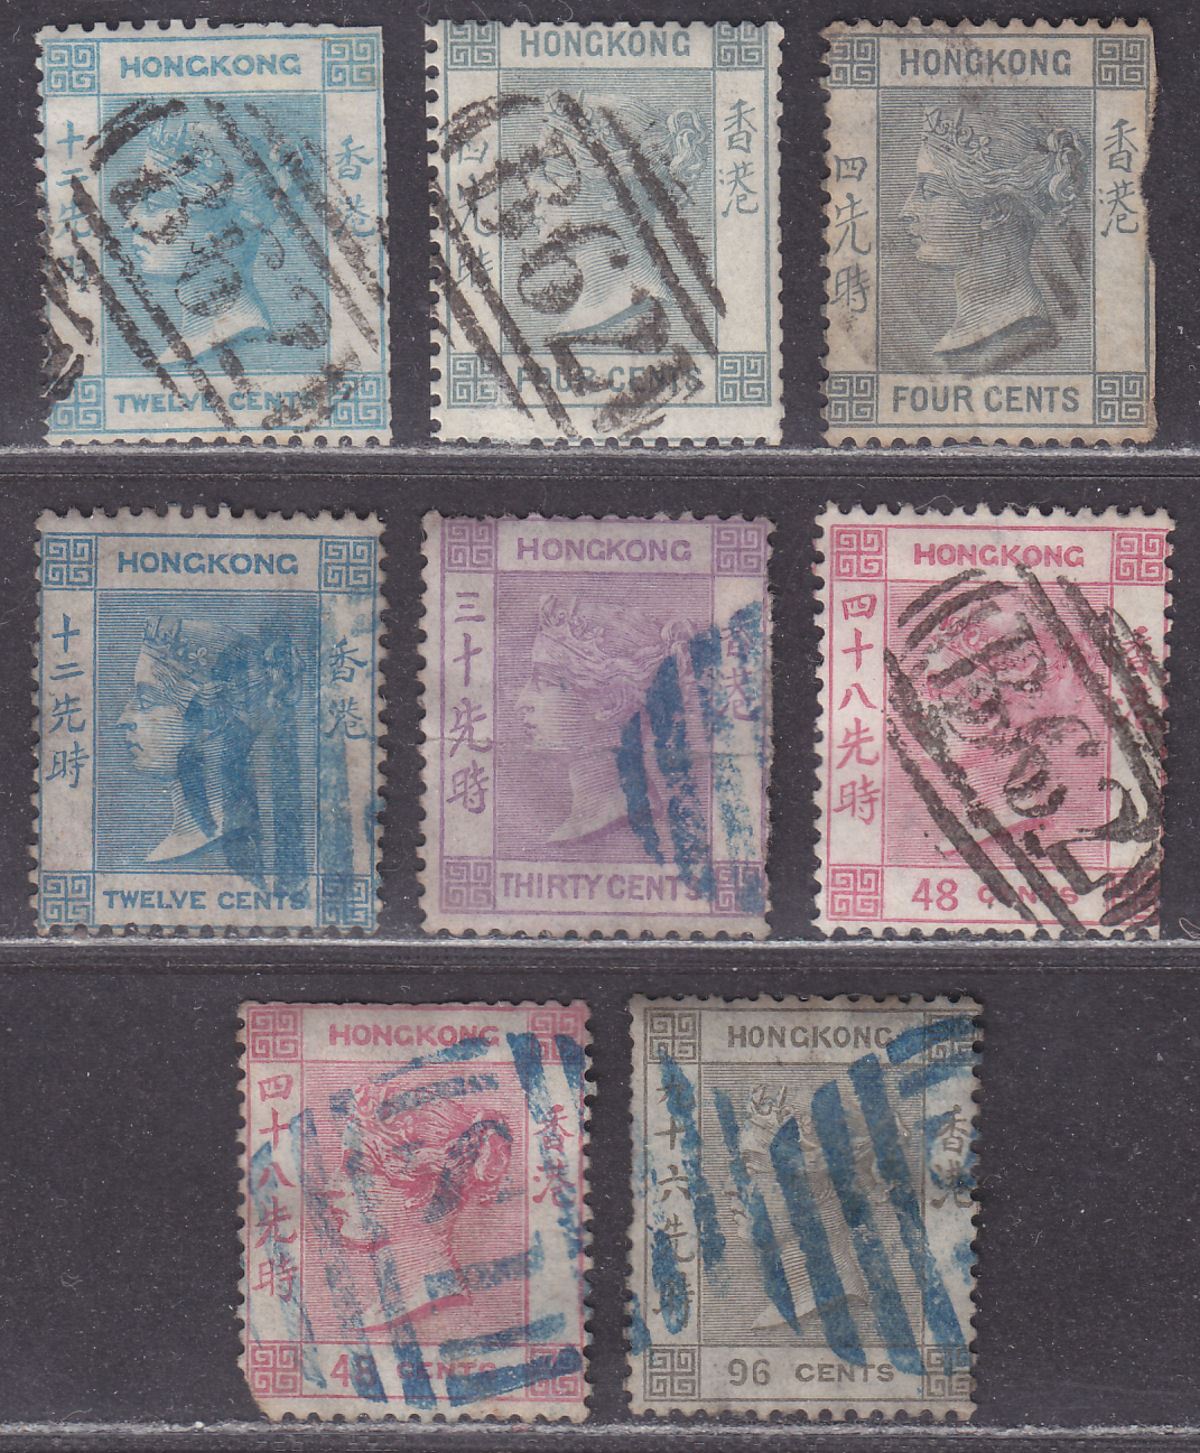 Hong Kong 1862-71 Queen Victoria Selection to 96c Used with faults